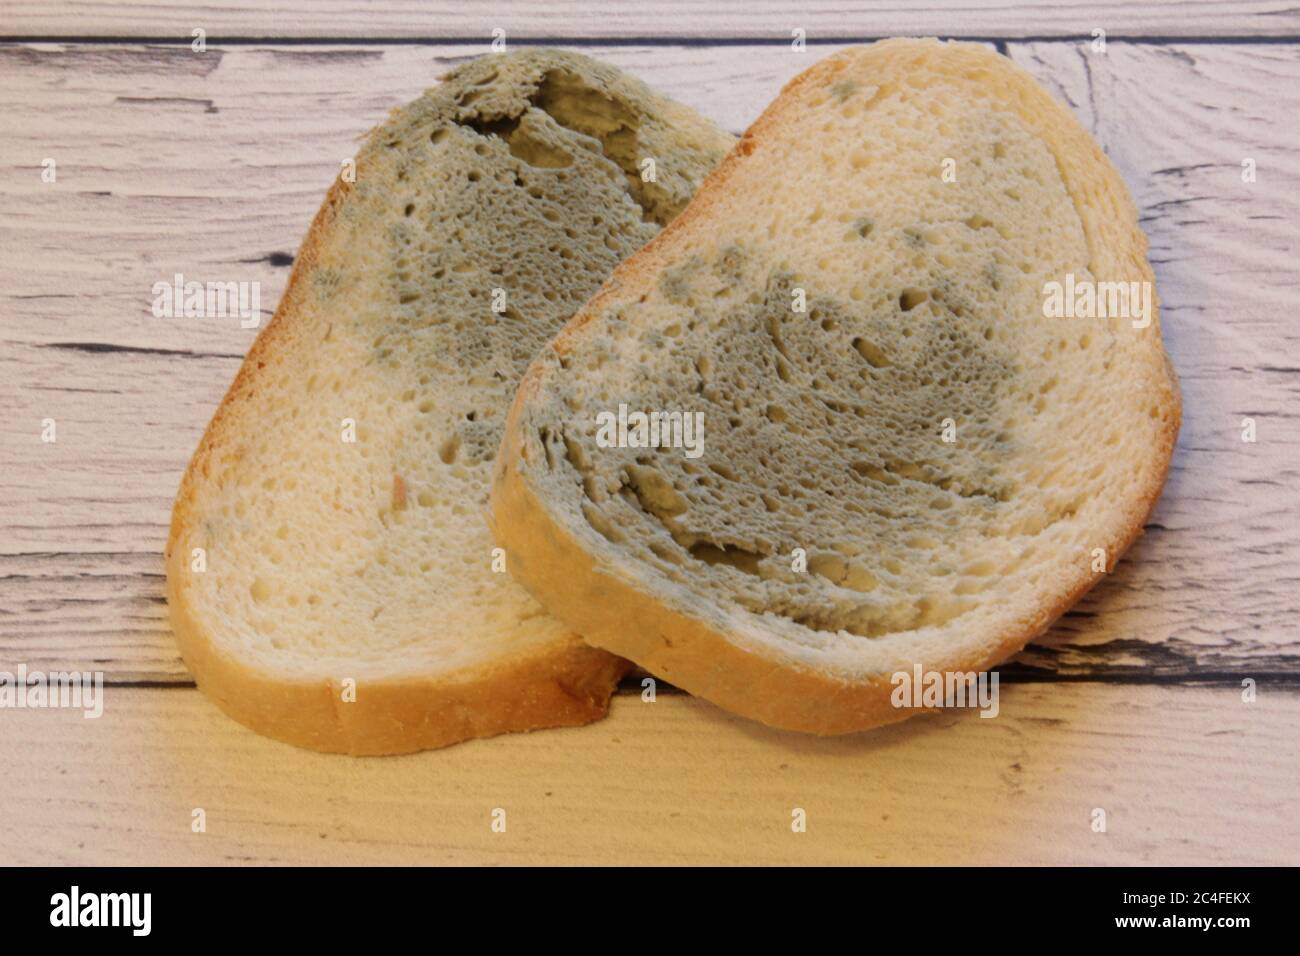 https://c8.alamy.com/comp/2C4FEKX/mold-growing-rapidly-on-moldy-bread-on-wooden-background-mildew-on-a-slice-of-bread-stale-bread-covered-with-mildew-2C4FEKX.jpg